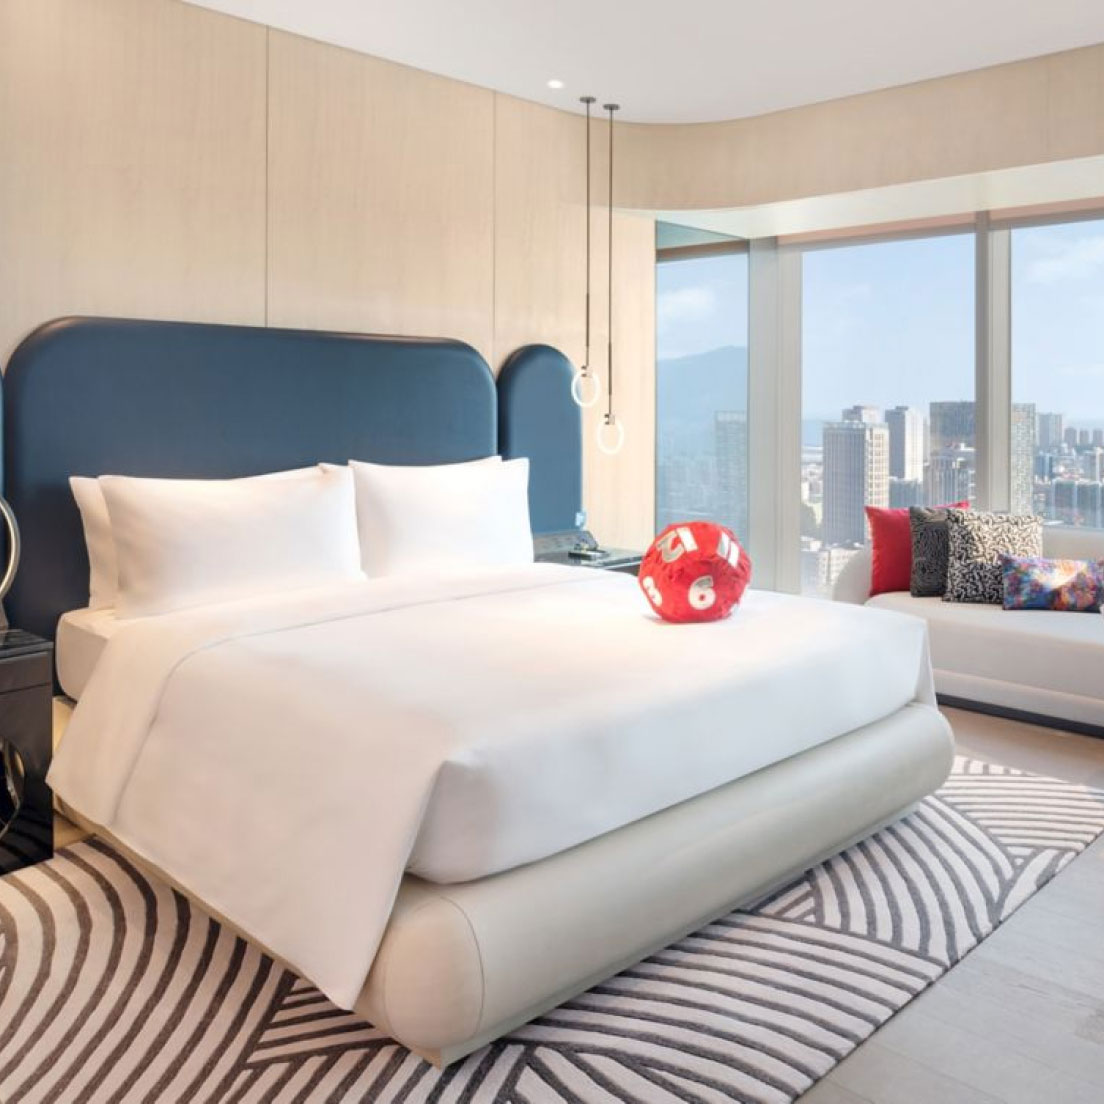 A modern hotel room with a large bed featuring white linens and a blue headboard. There is a red 